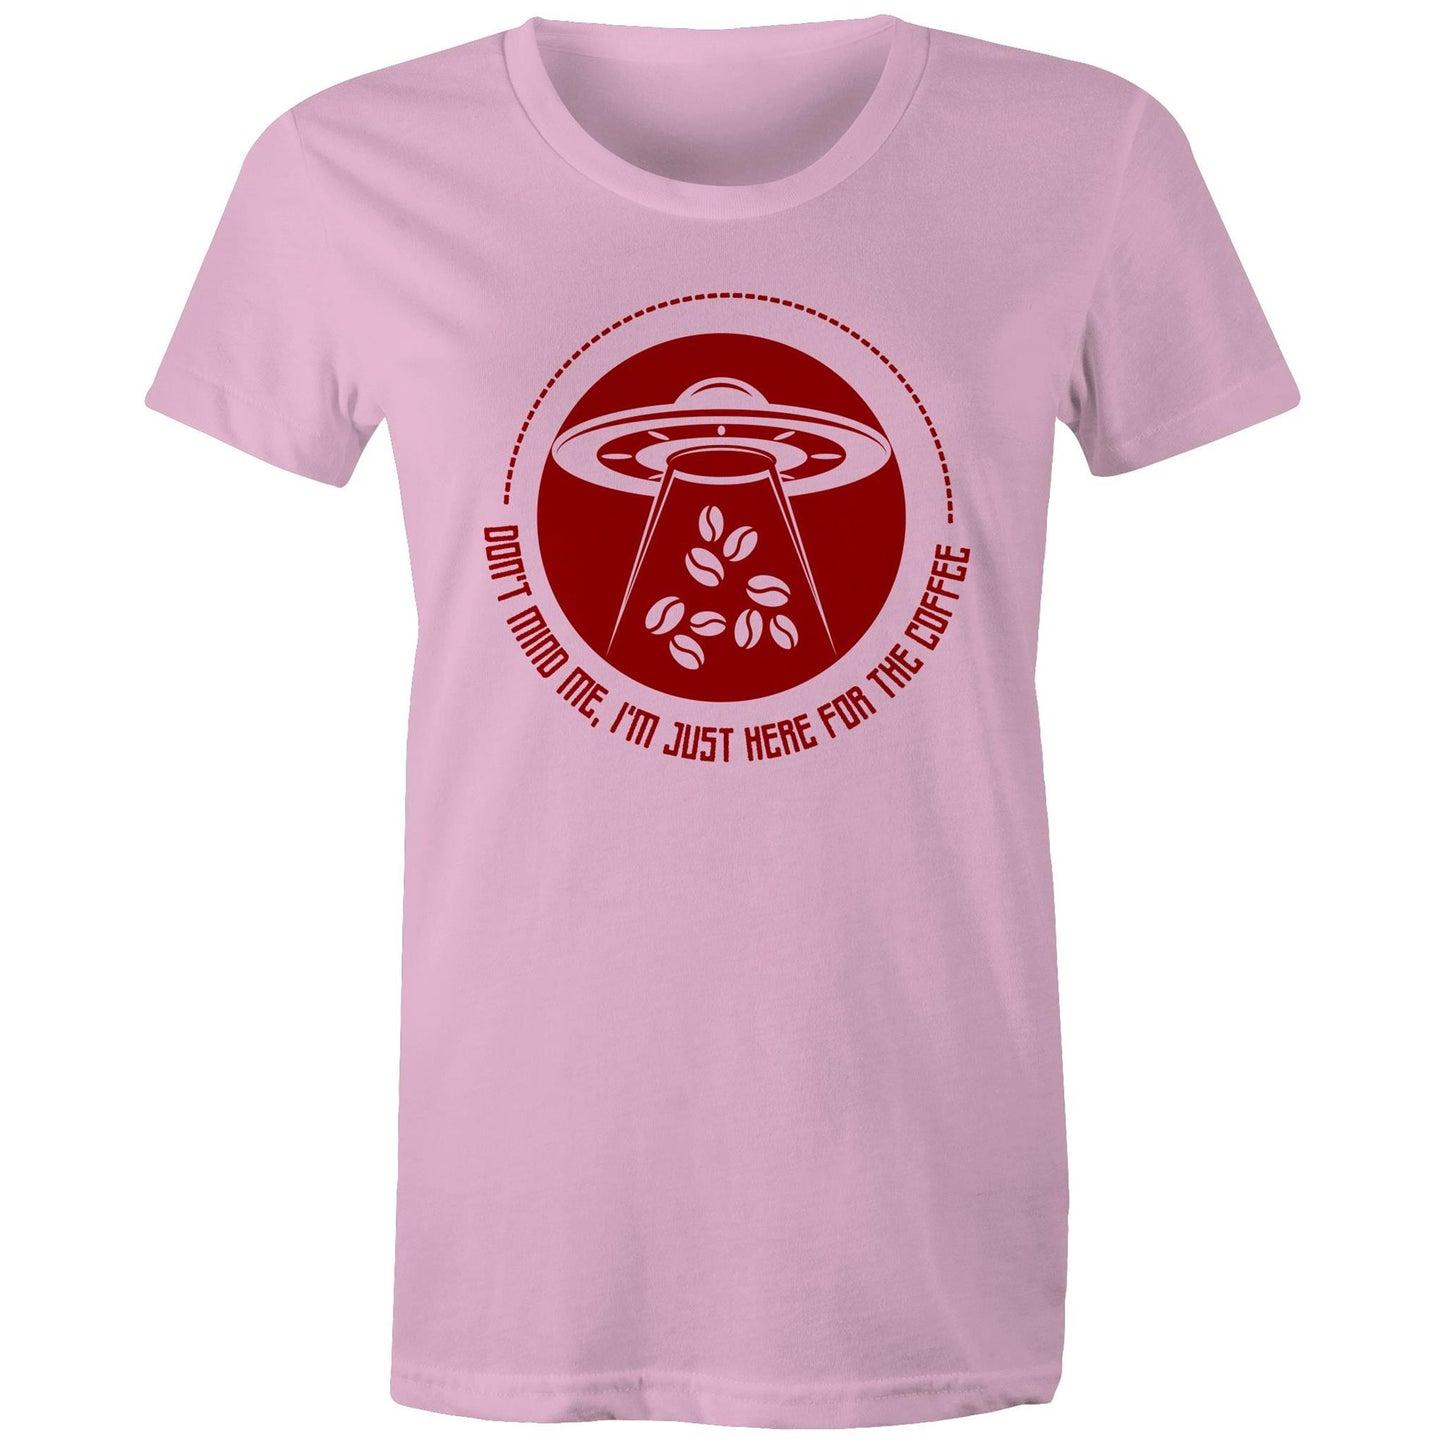 Don't Mind Me, I'm Just Here For The Coffee, Alien UFO - Womens T-shirt Pink Womens T-shirt Coffee Sci Fi